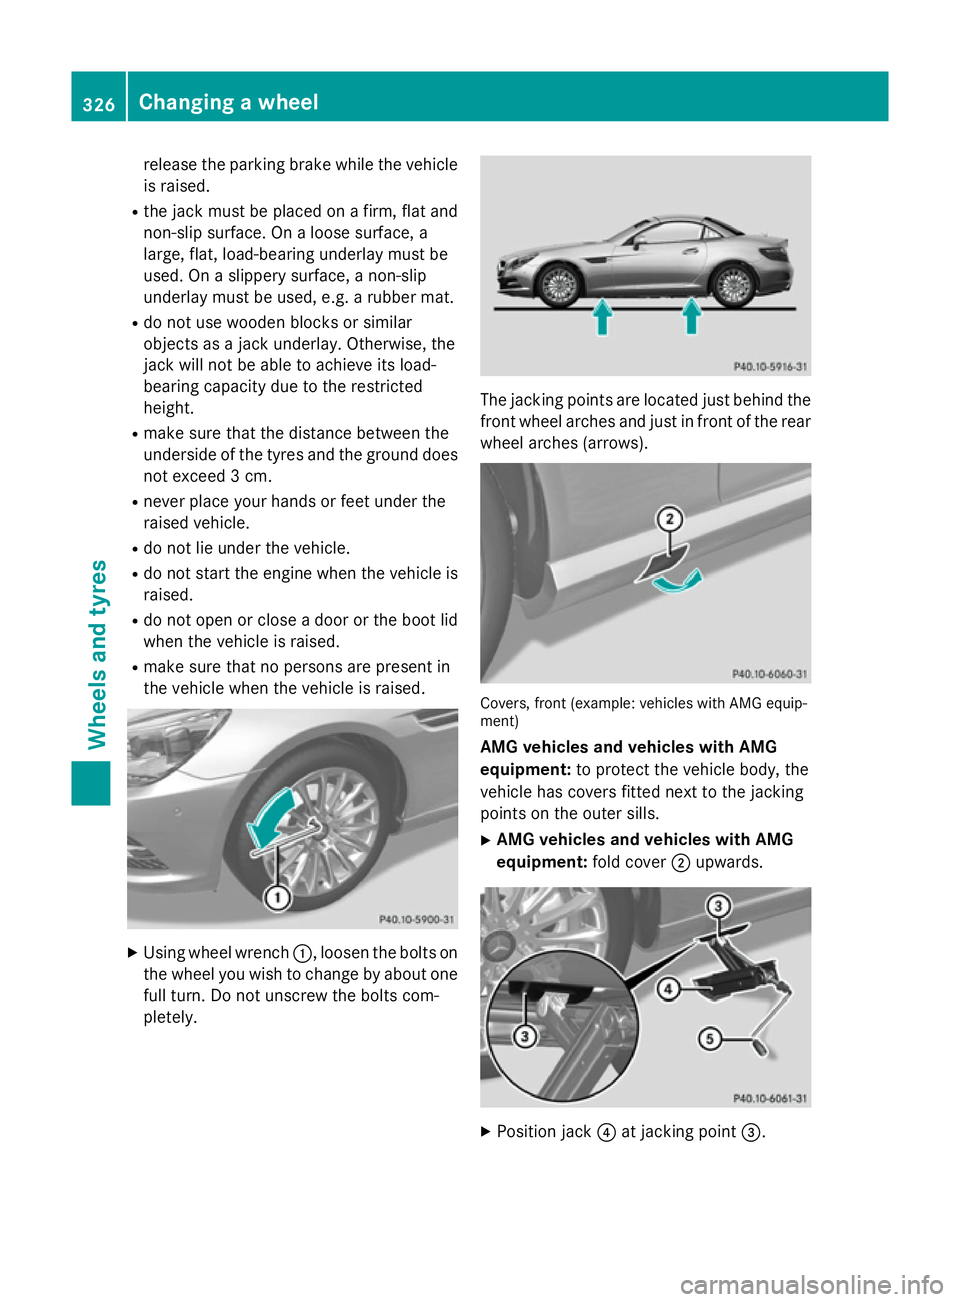 MERCEDES-BENZ SLK ROADSTER 2014  Owners Manual release the parking brake while the vehicle
is raised.
R the jack must be placed on a firm, flat and
non-slip surface. On a loose surface, a
large, flat, load-bearing underlay must be
used. On a slipp